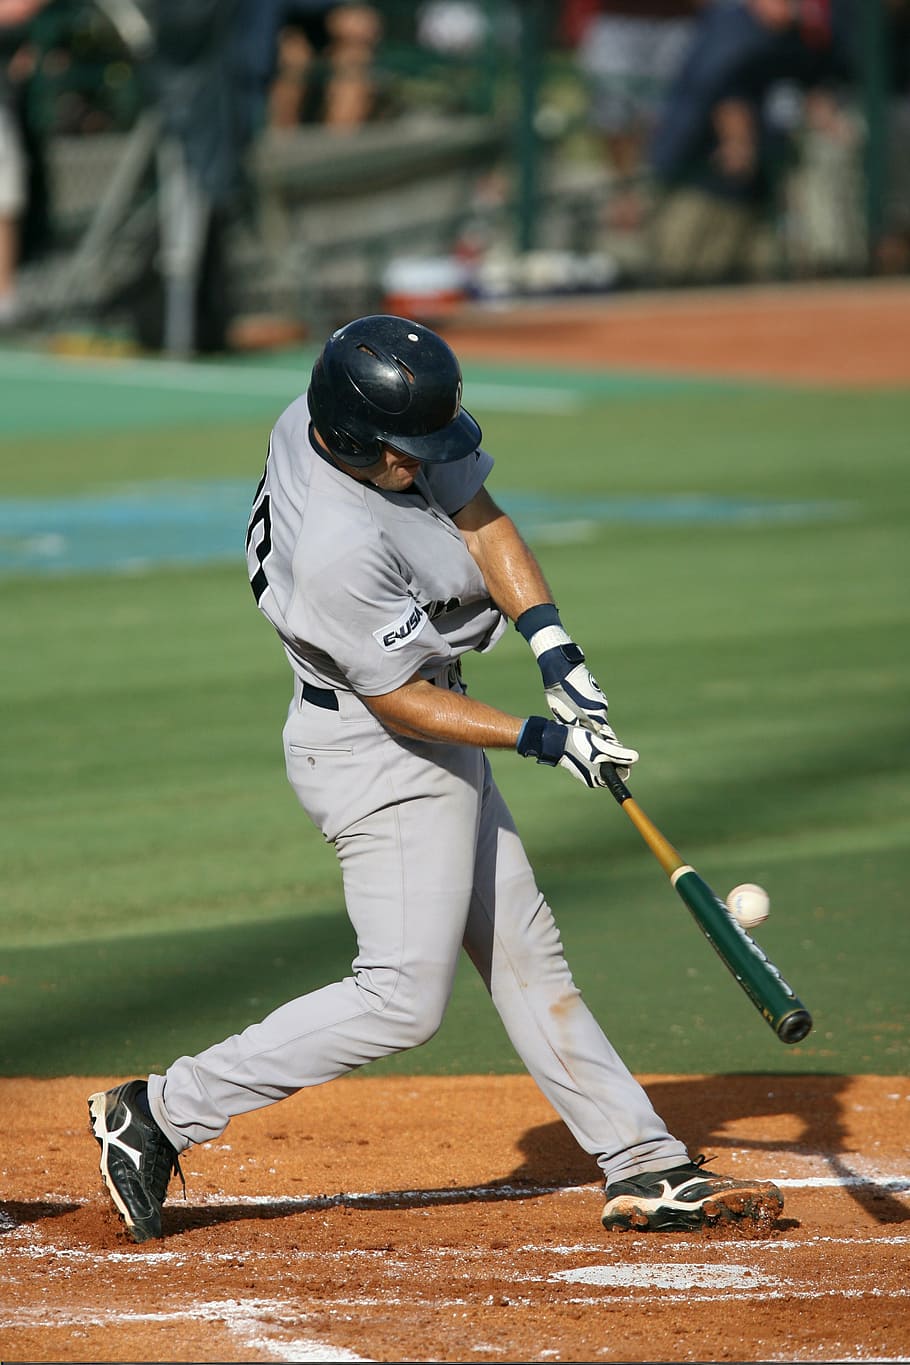 baseball player hitting the ball, batter, game, competition, home